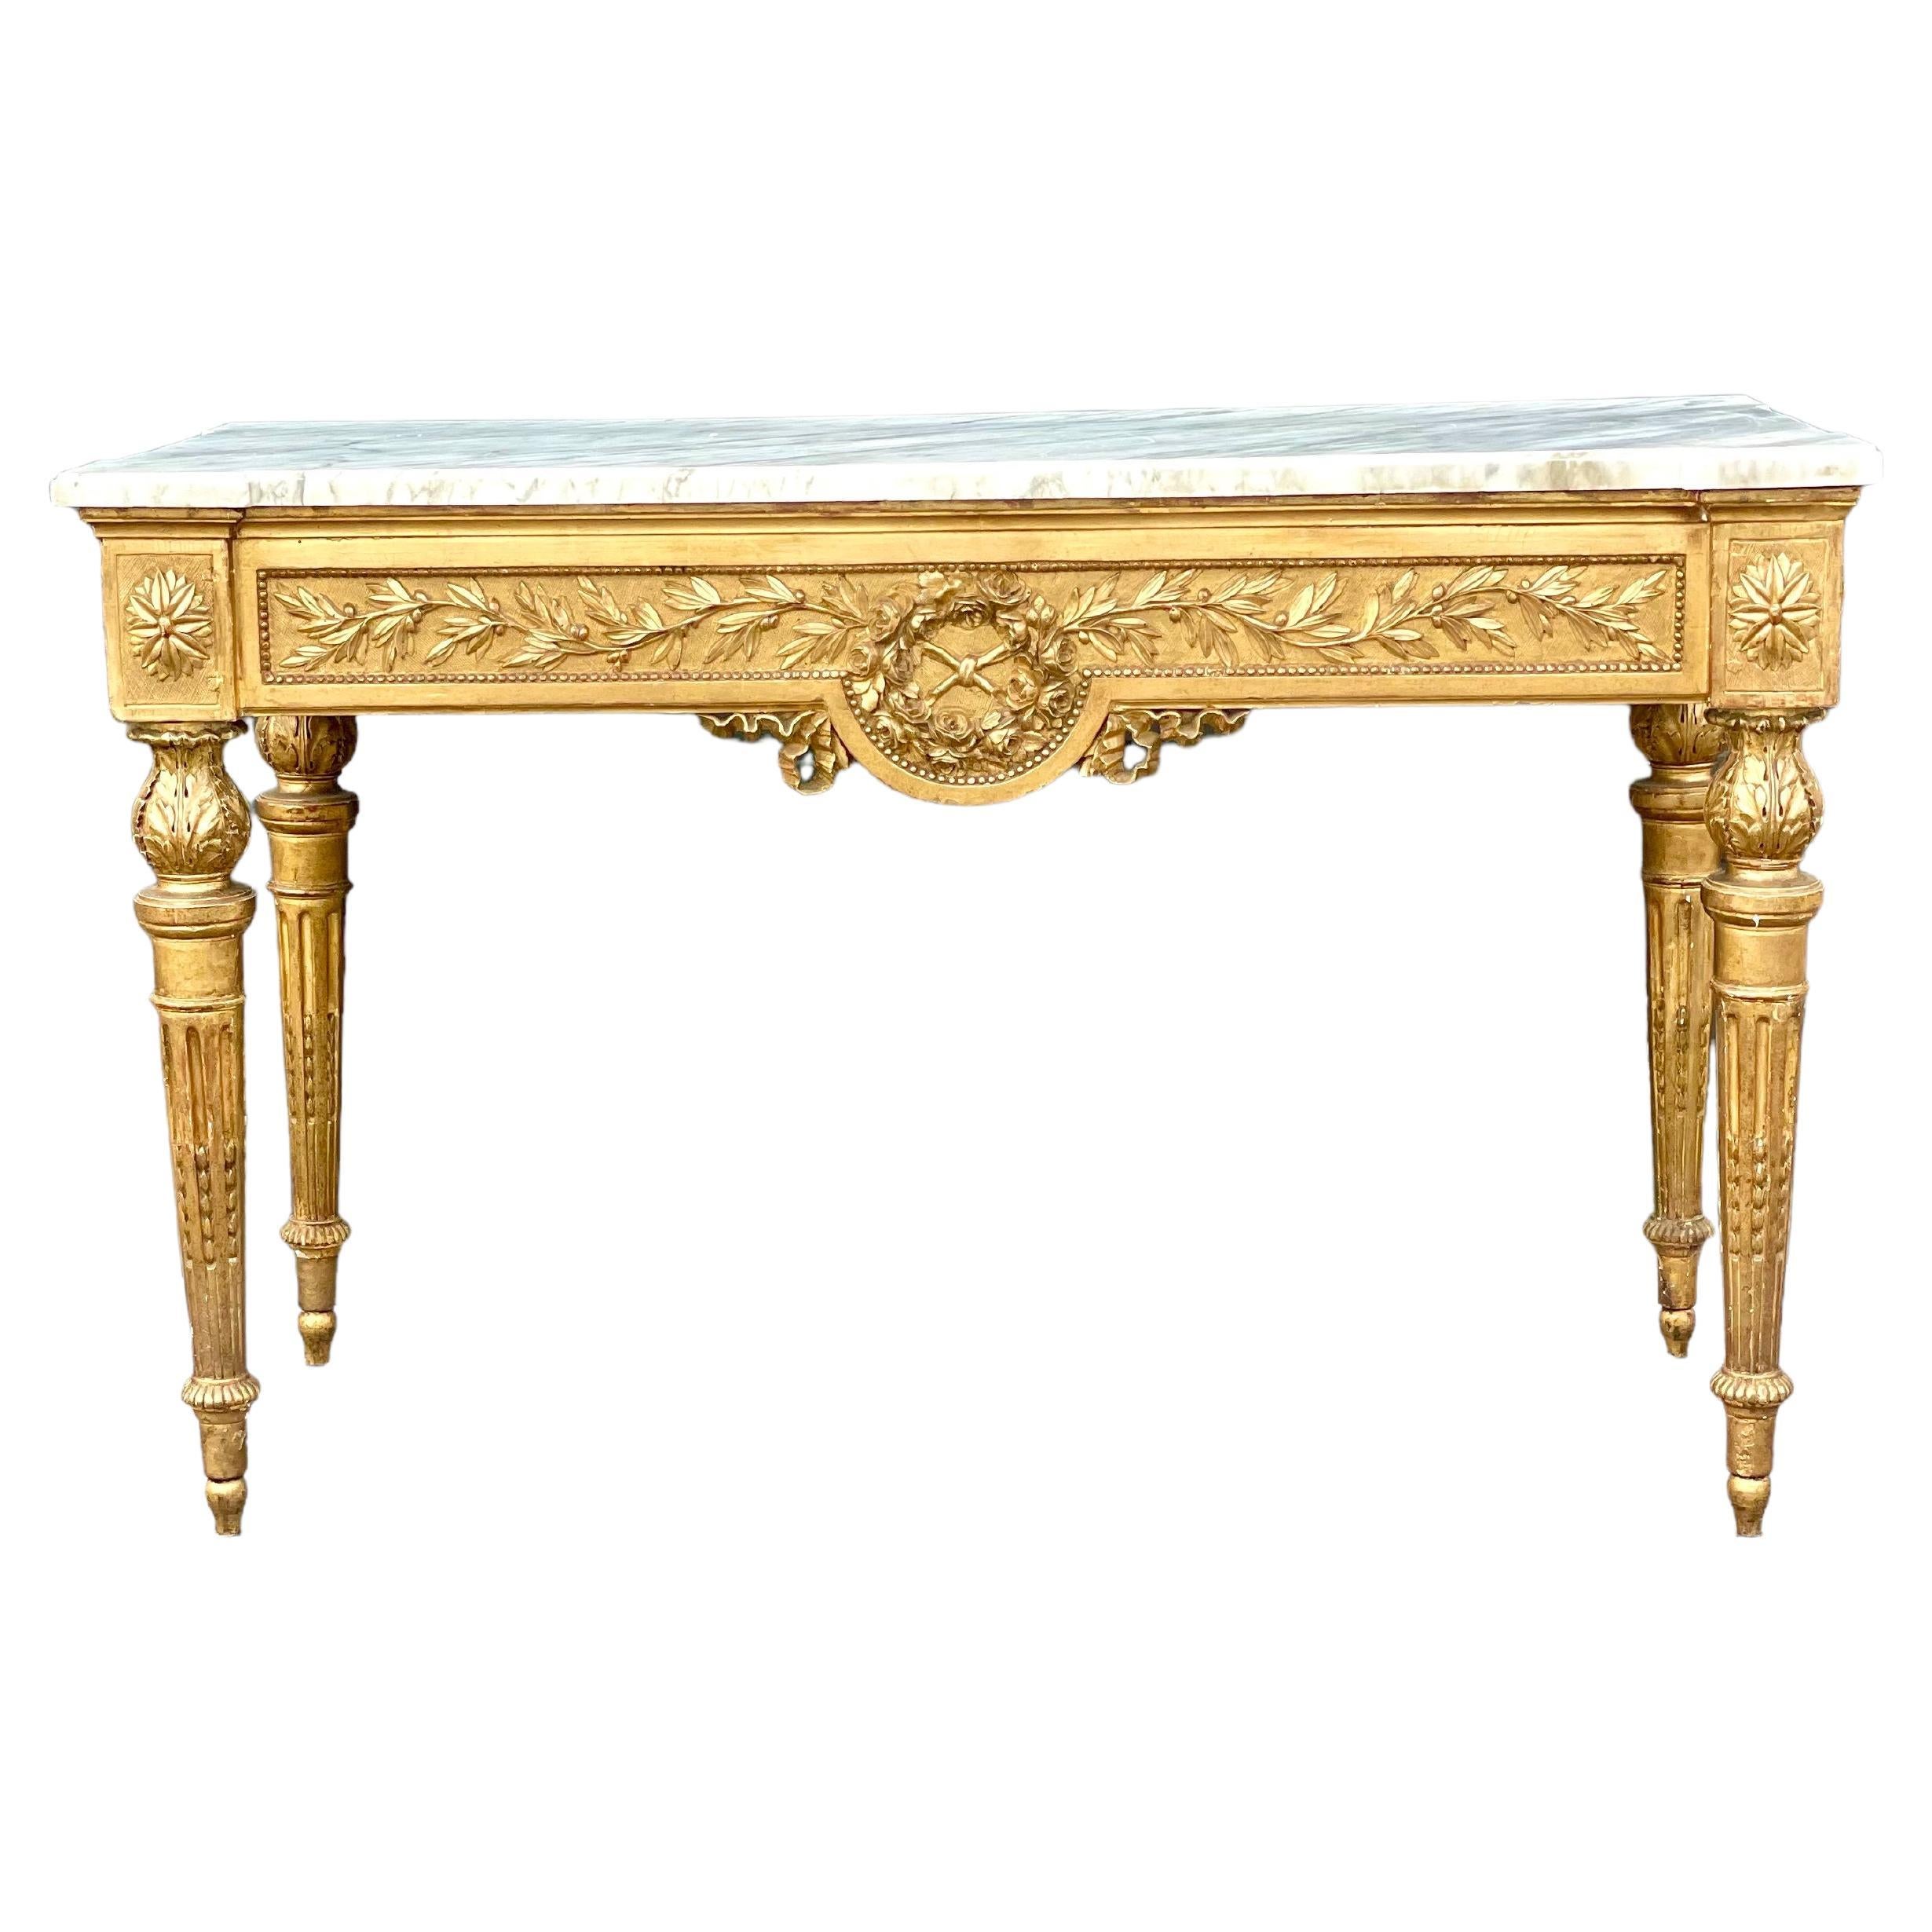 18th Century French Louis XVI Period Giltwood Console Table